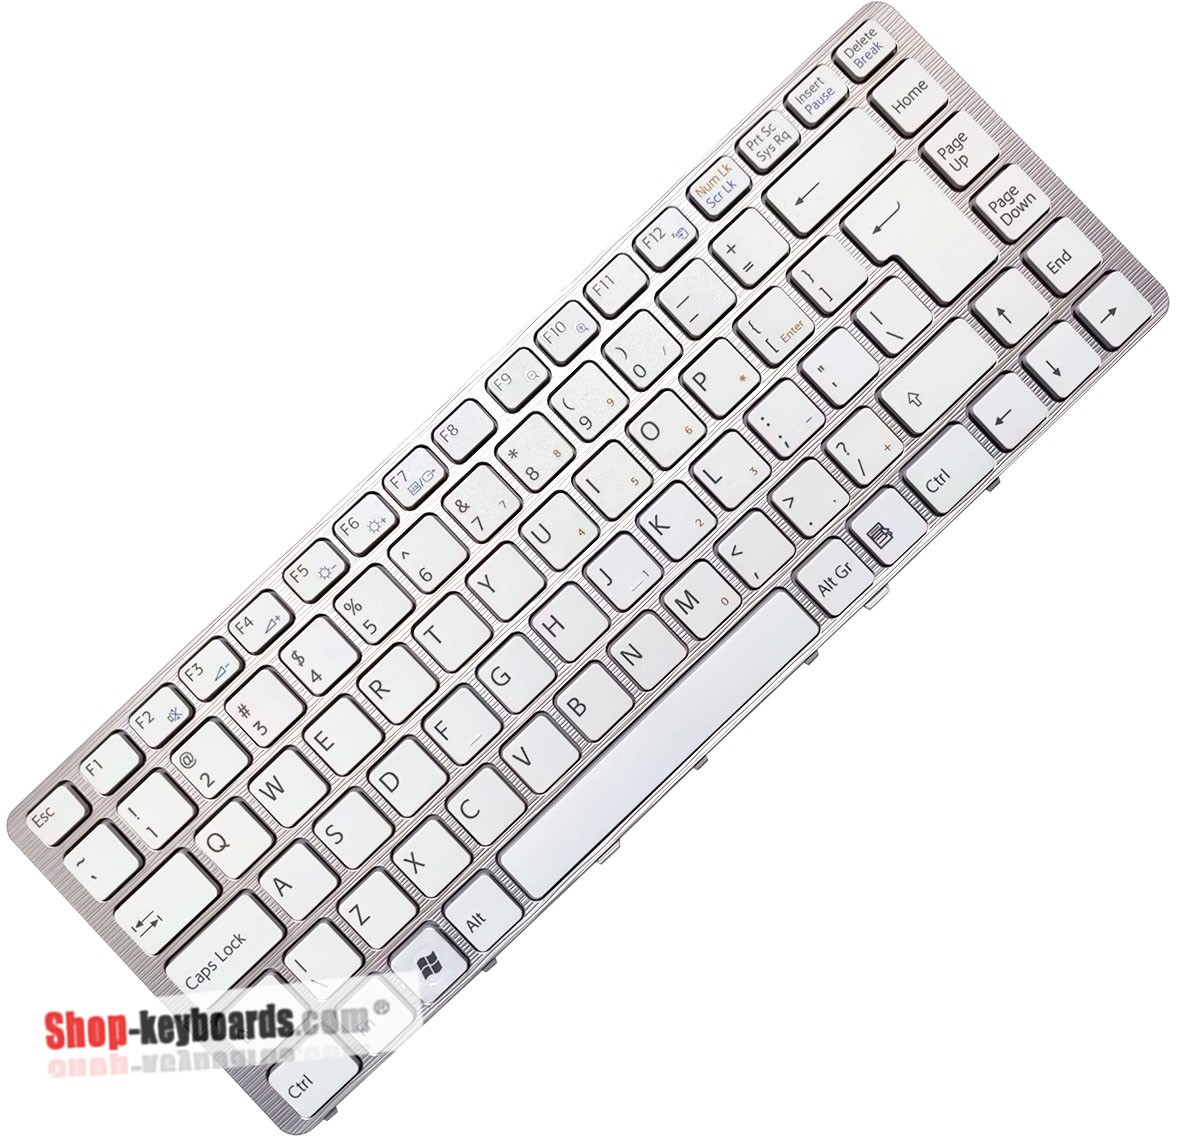 Sony MP-08J96I0-8861 Keyboard replacement